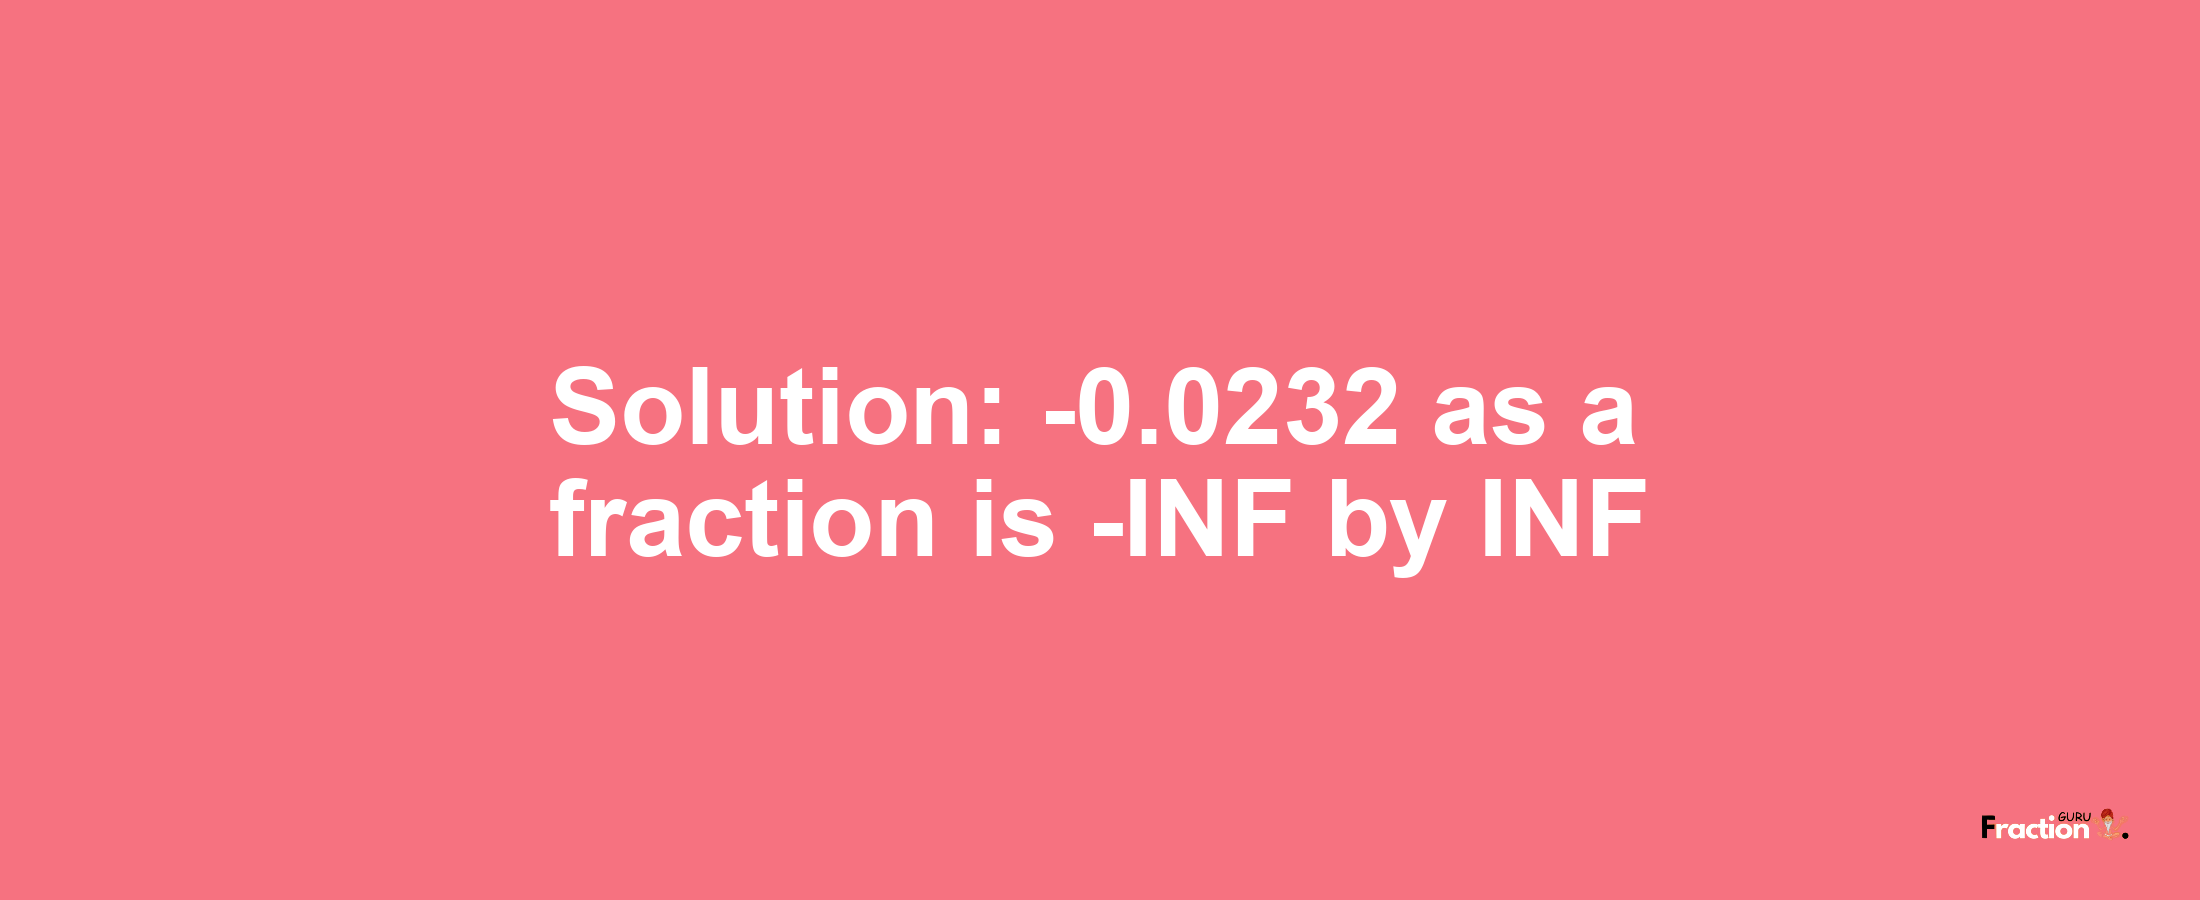 Solution:-0.0232 as a fraction is -INF/INF